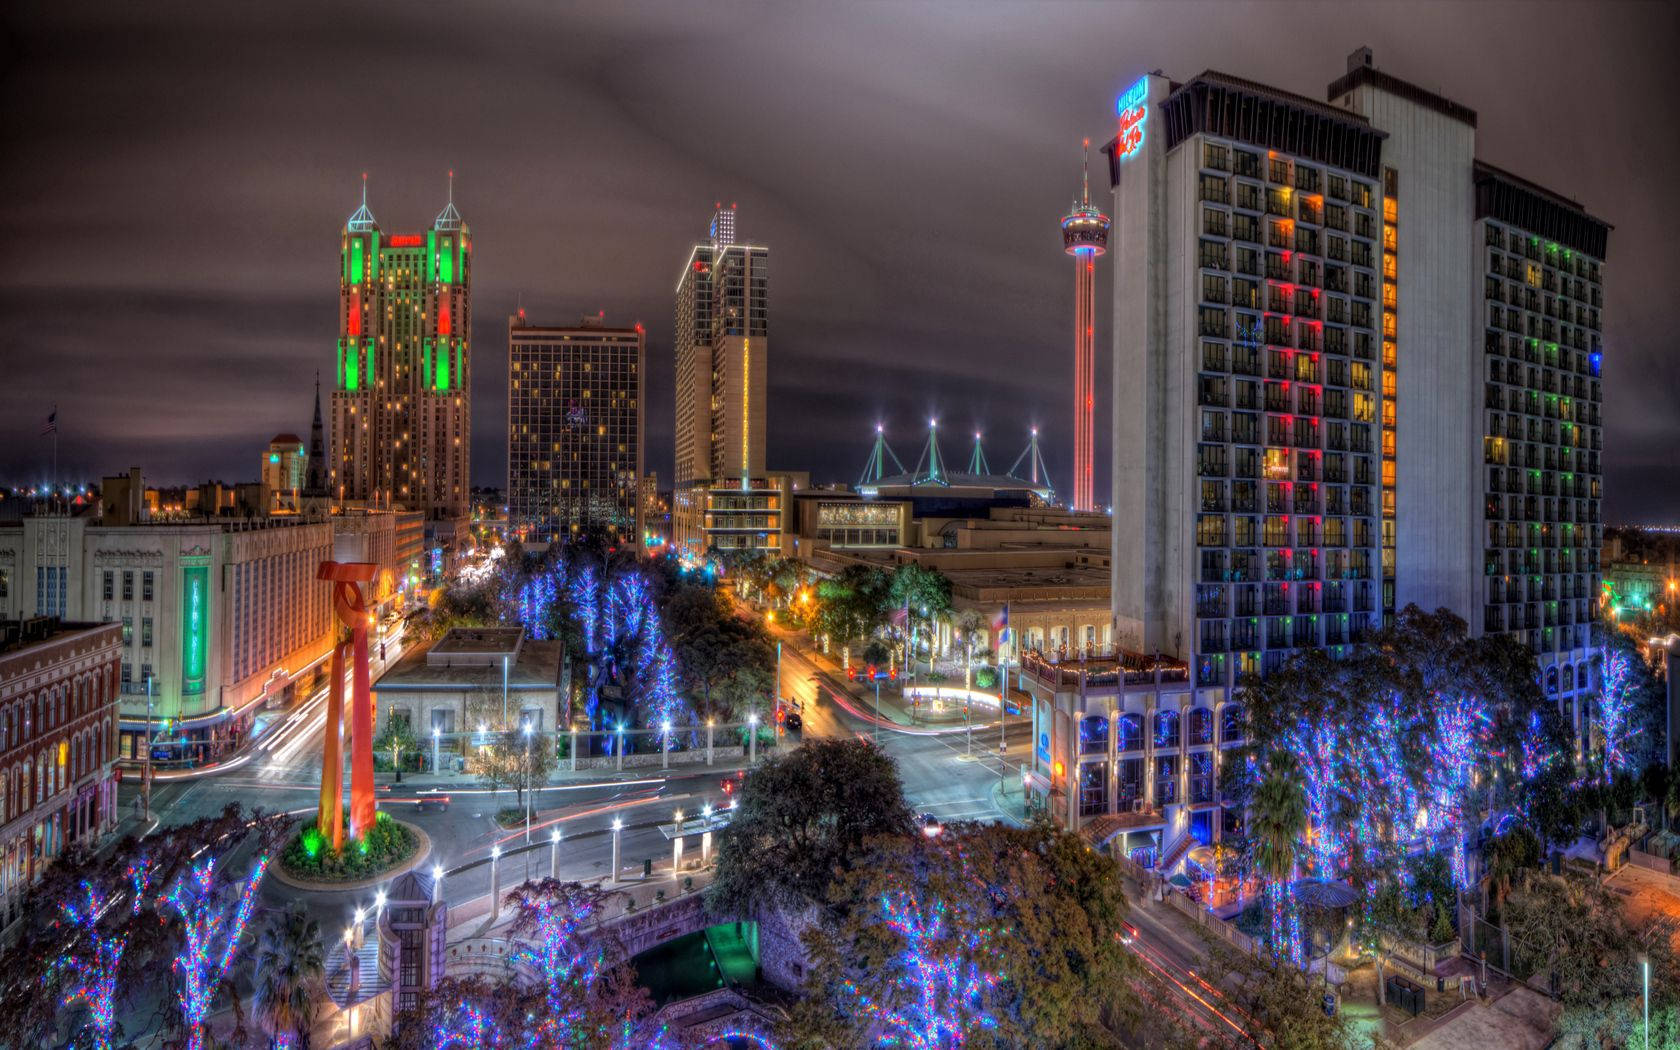 Welcome to the colorful city of San Antonio, Texas! Wallpaper